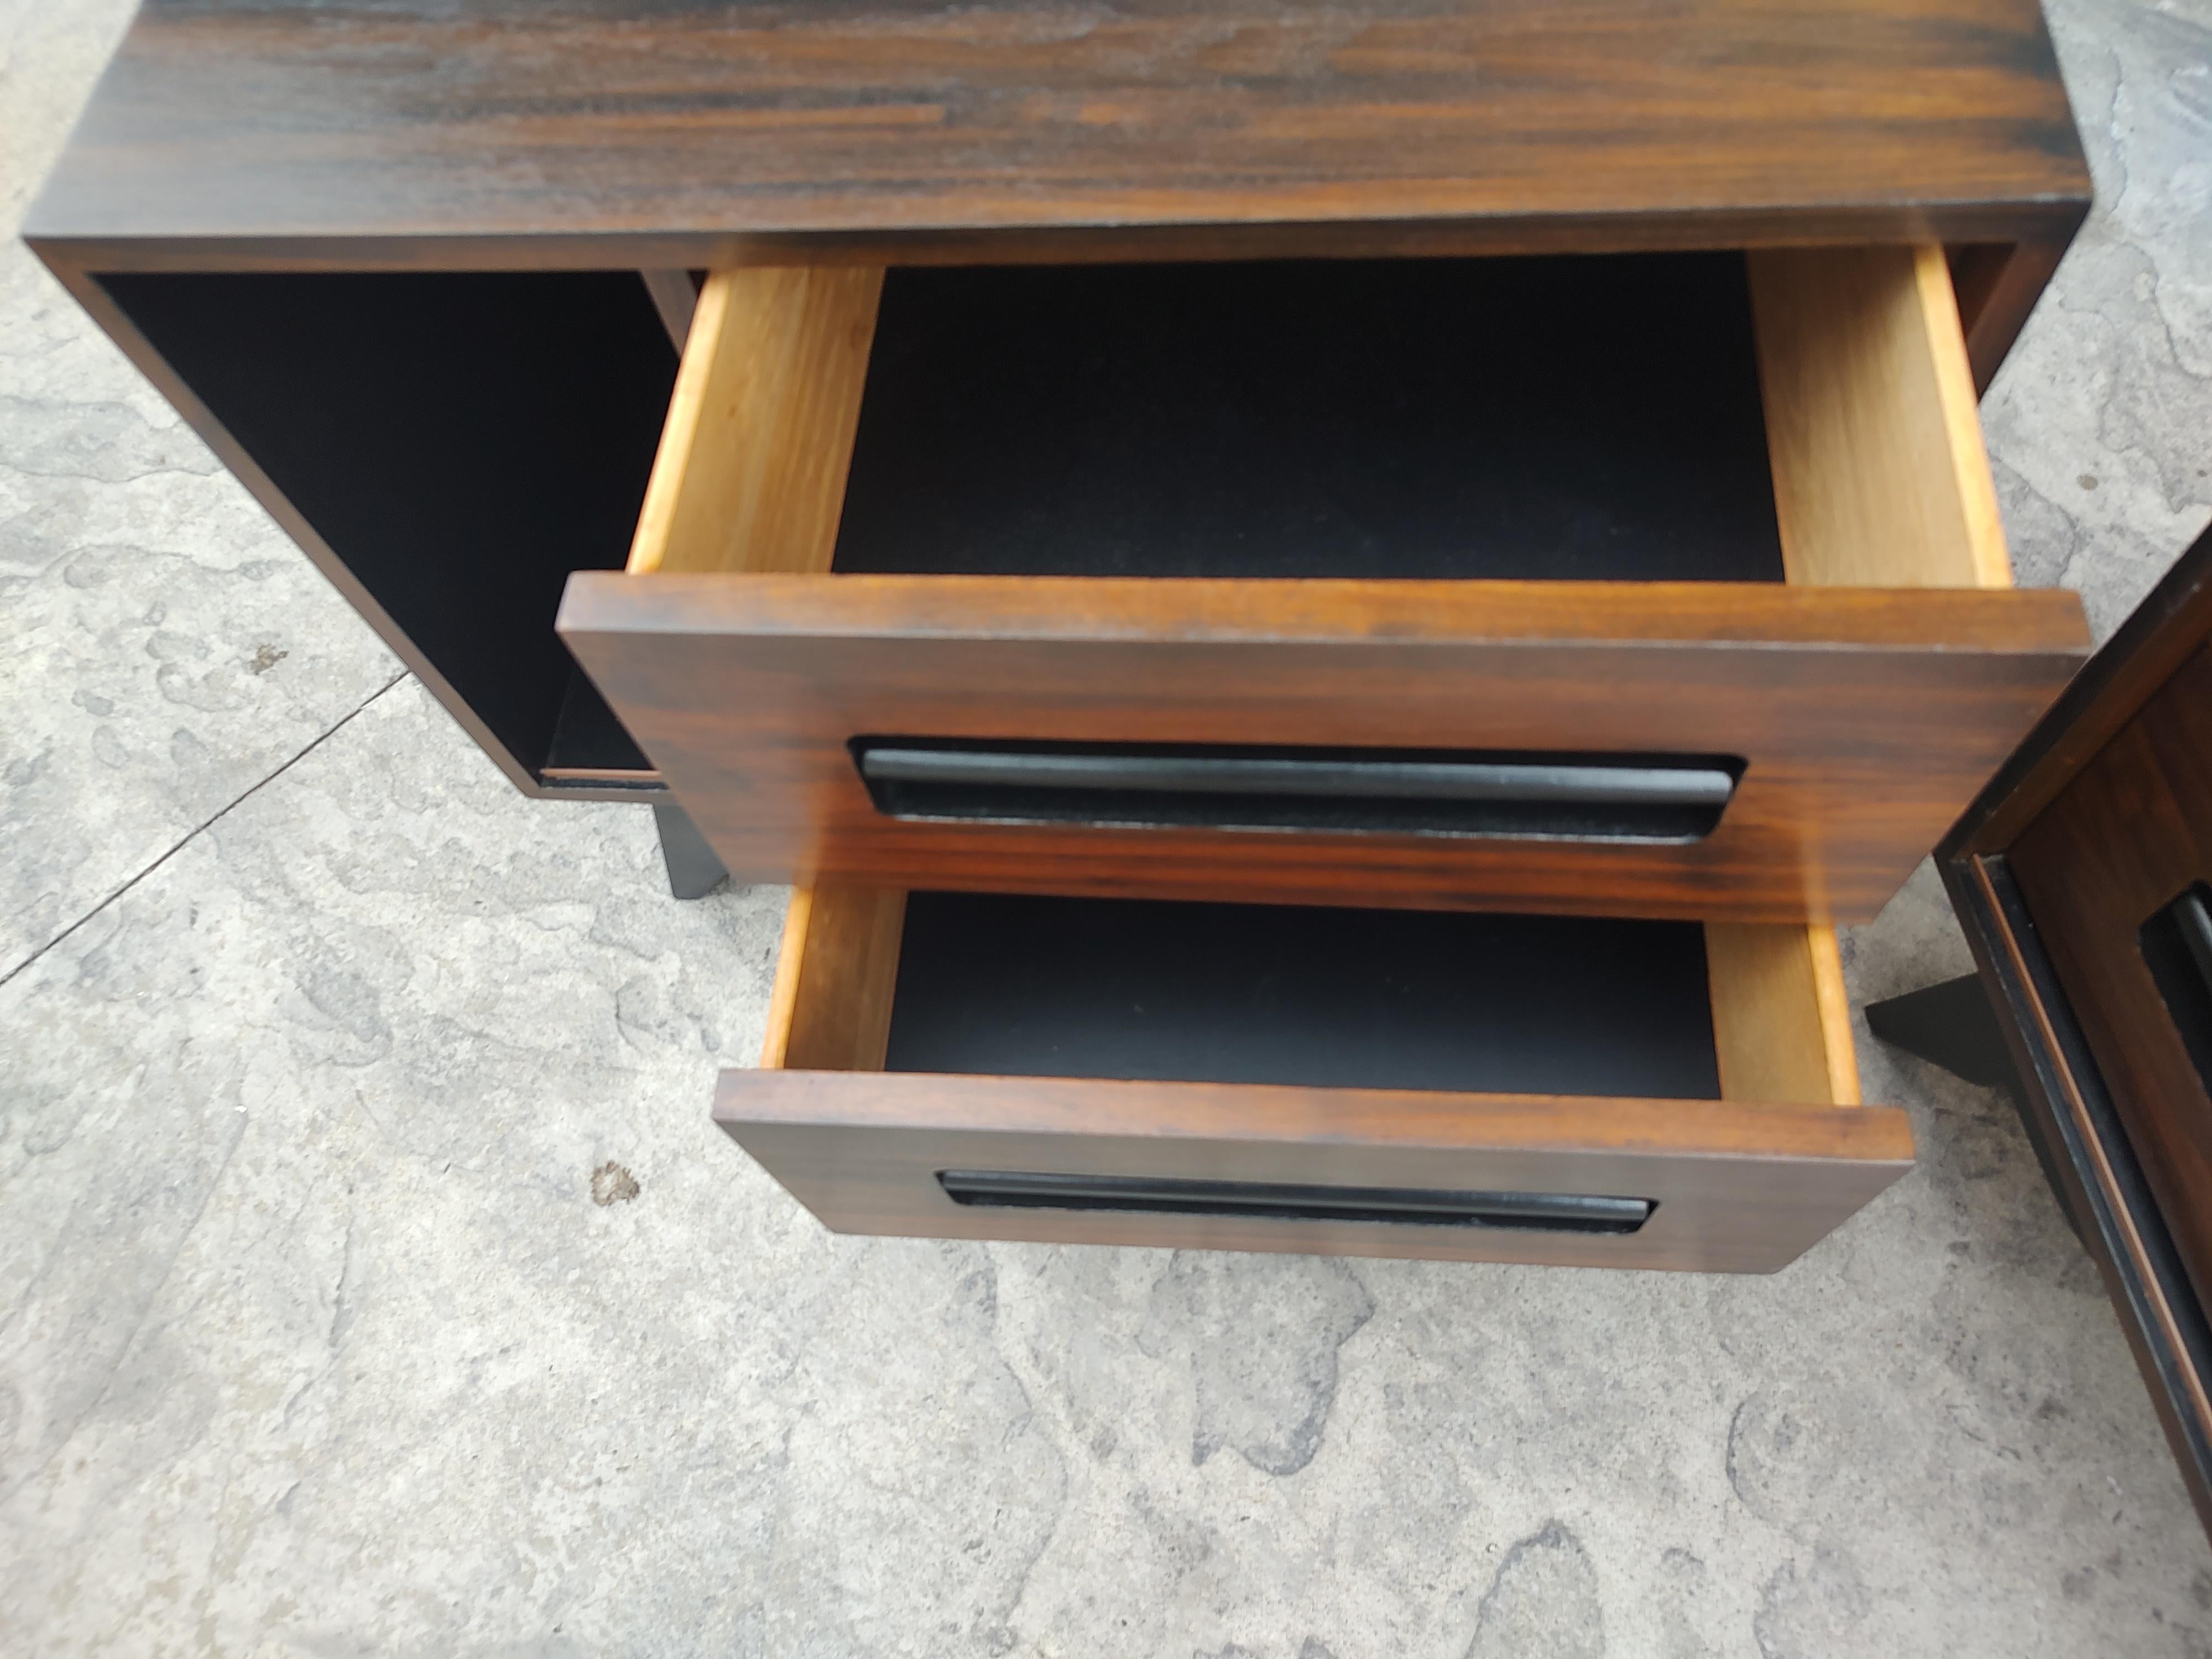 Pair of Mid-Century Modern Danish Rosewood & Black Lacquer Nightstands C1970 For Sale 6